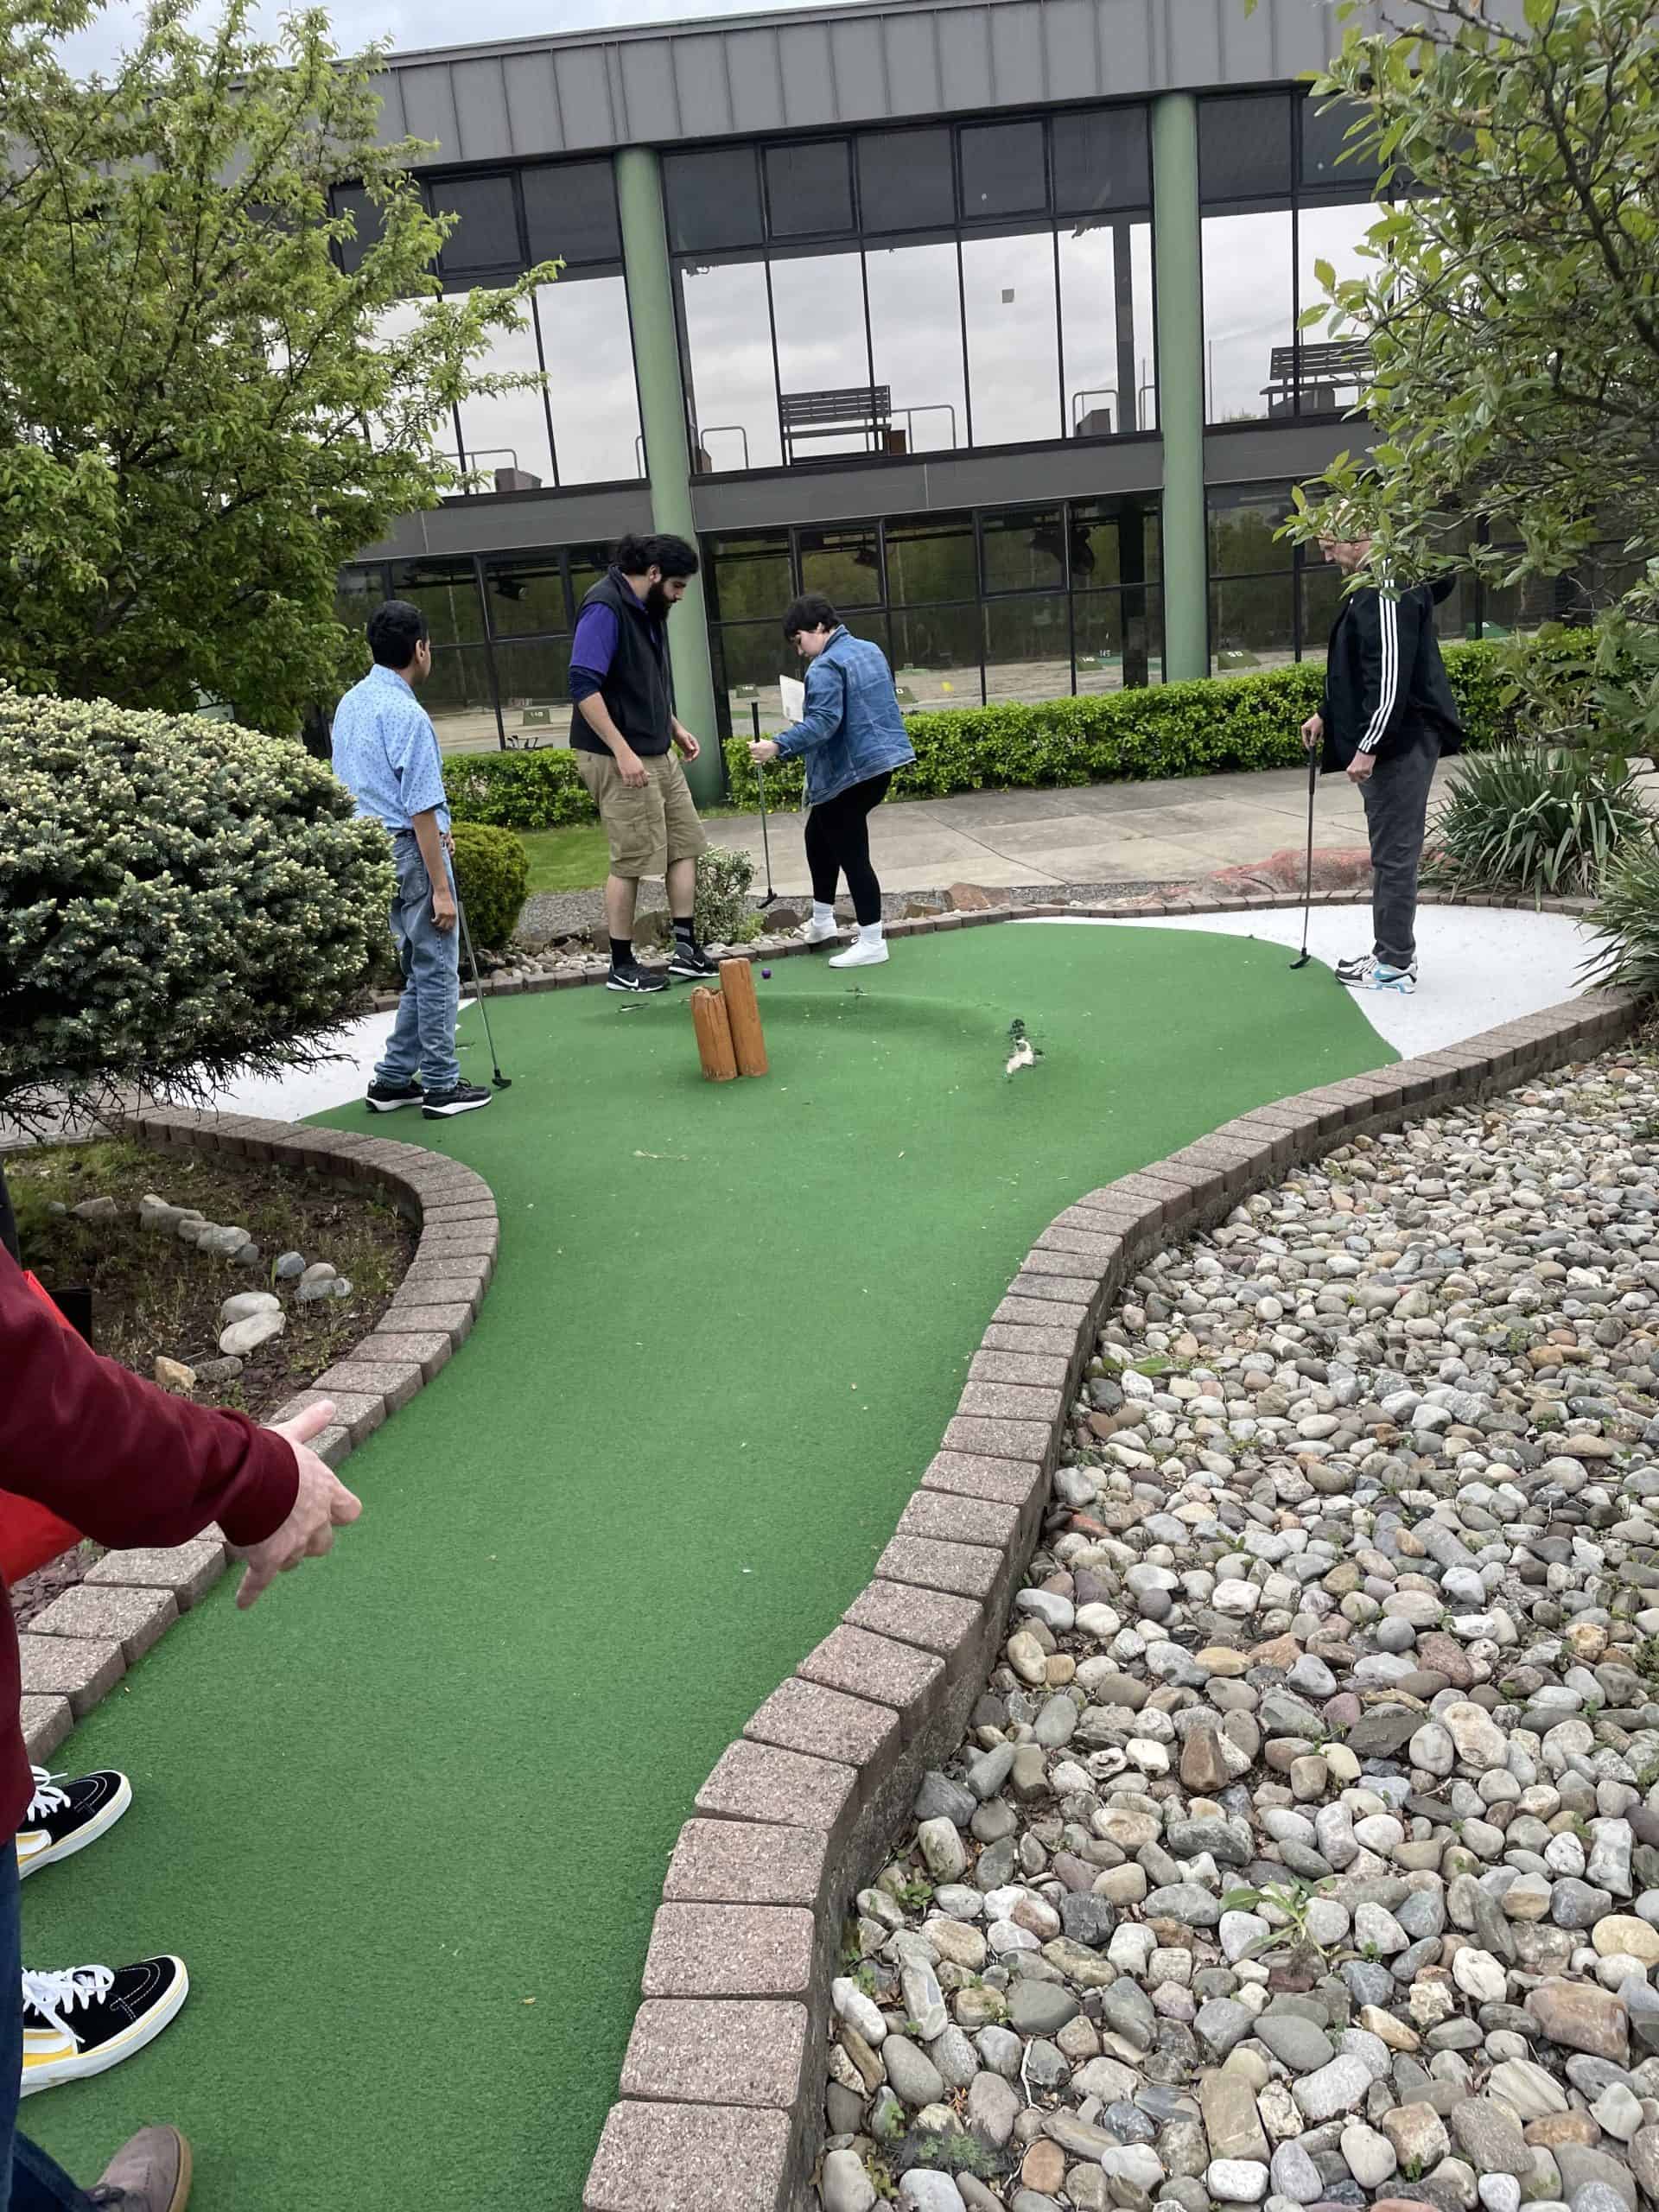 Four people standing on a mini-golf course.